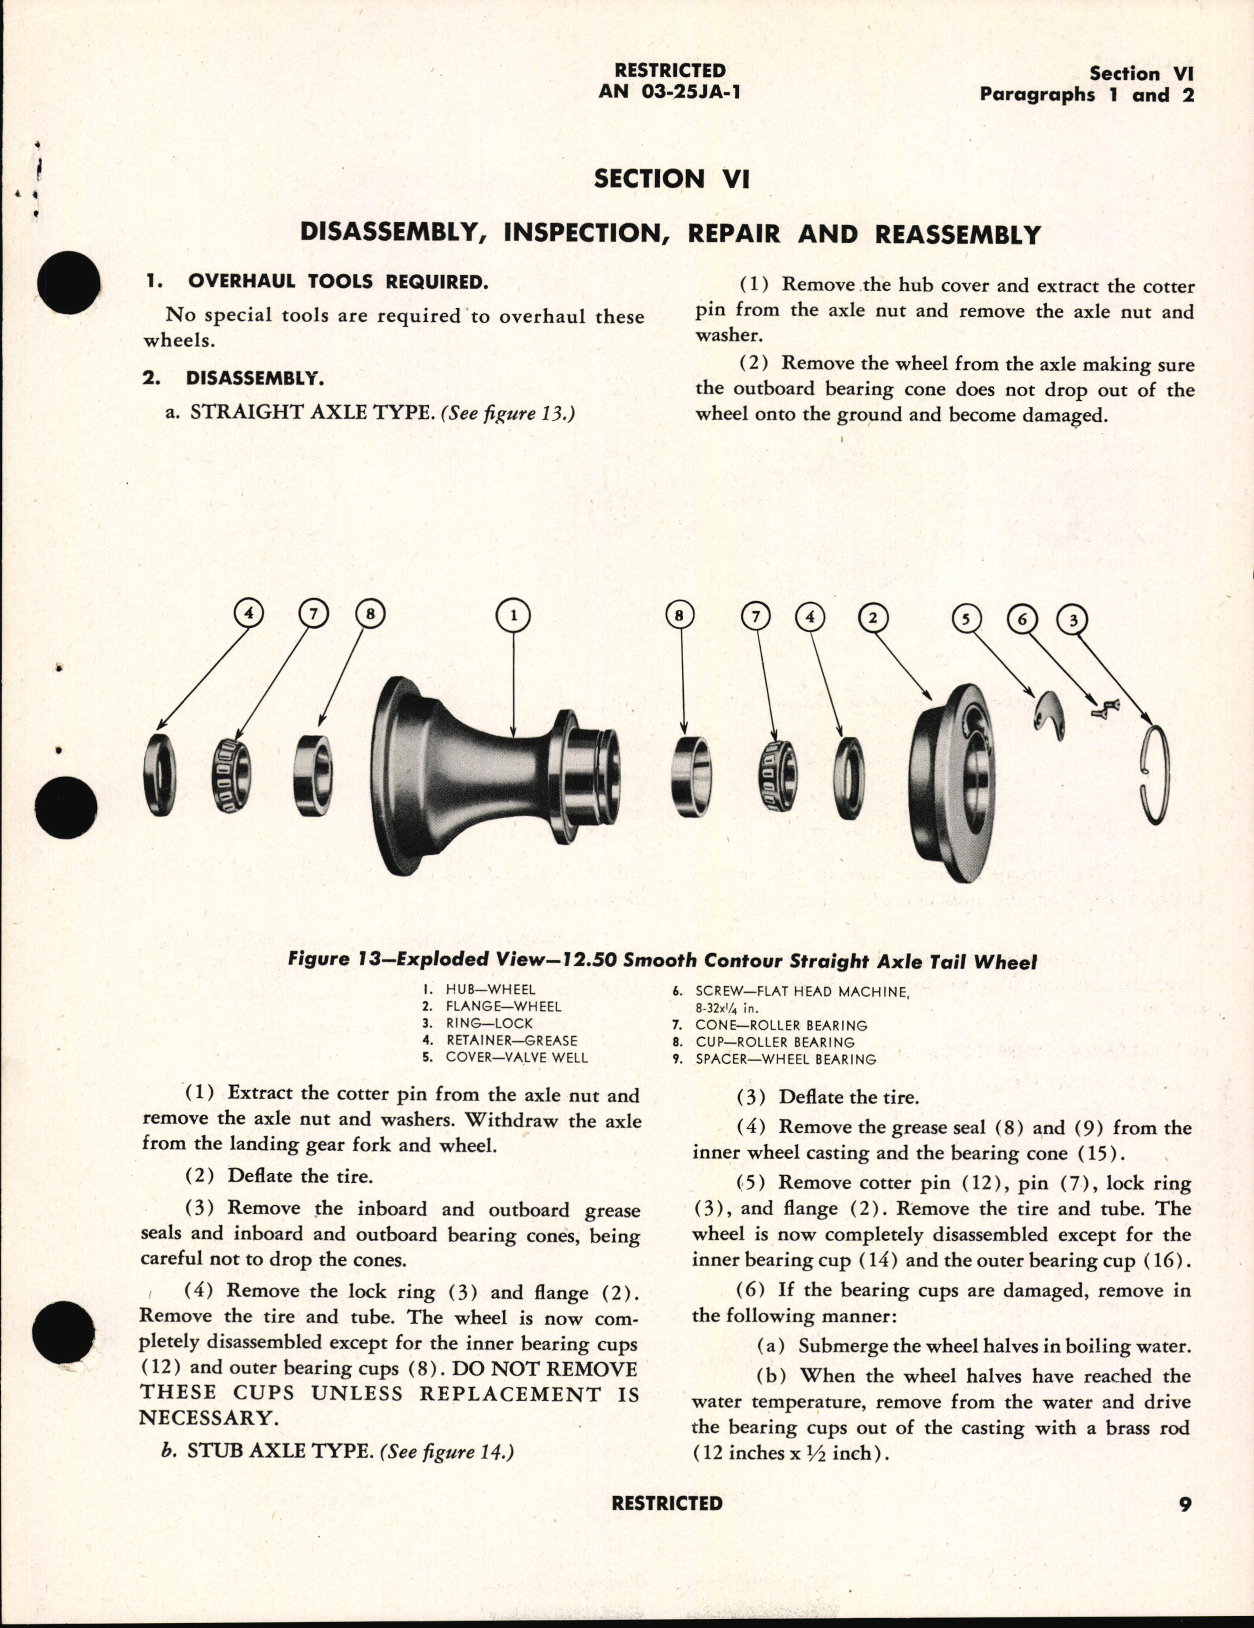 Sample page 5 from AirCorps Library document: Handbook of Instructions with Parts Catalog for Smooth Contour Tail Wheels